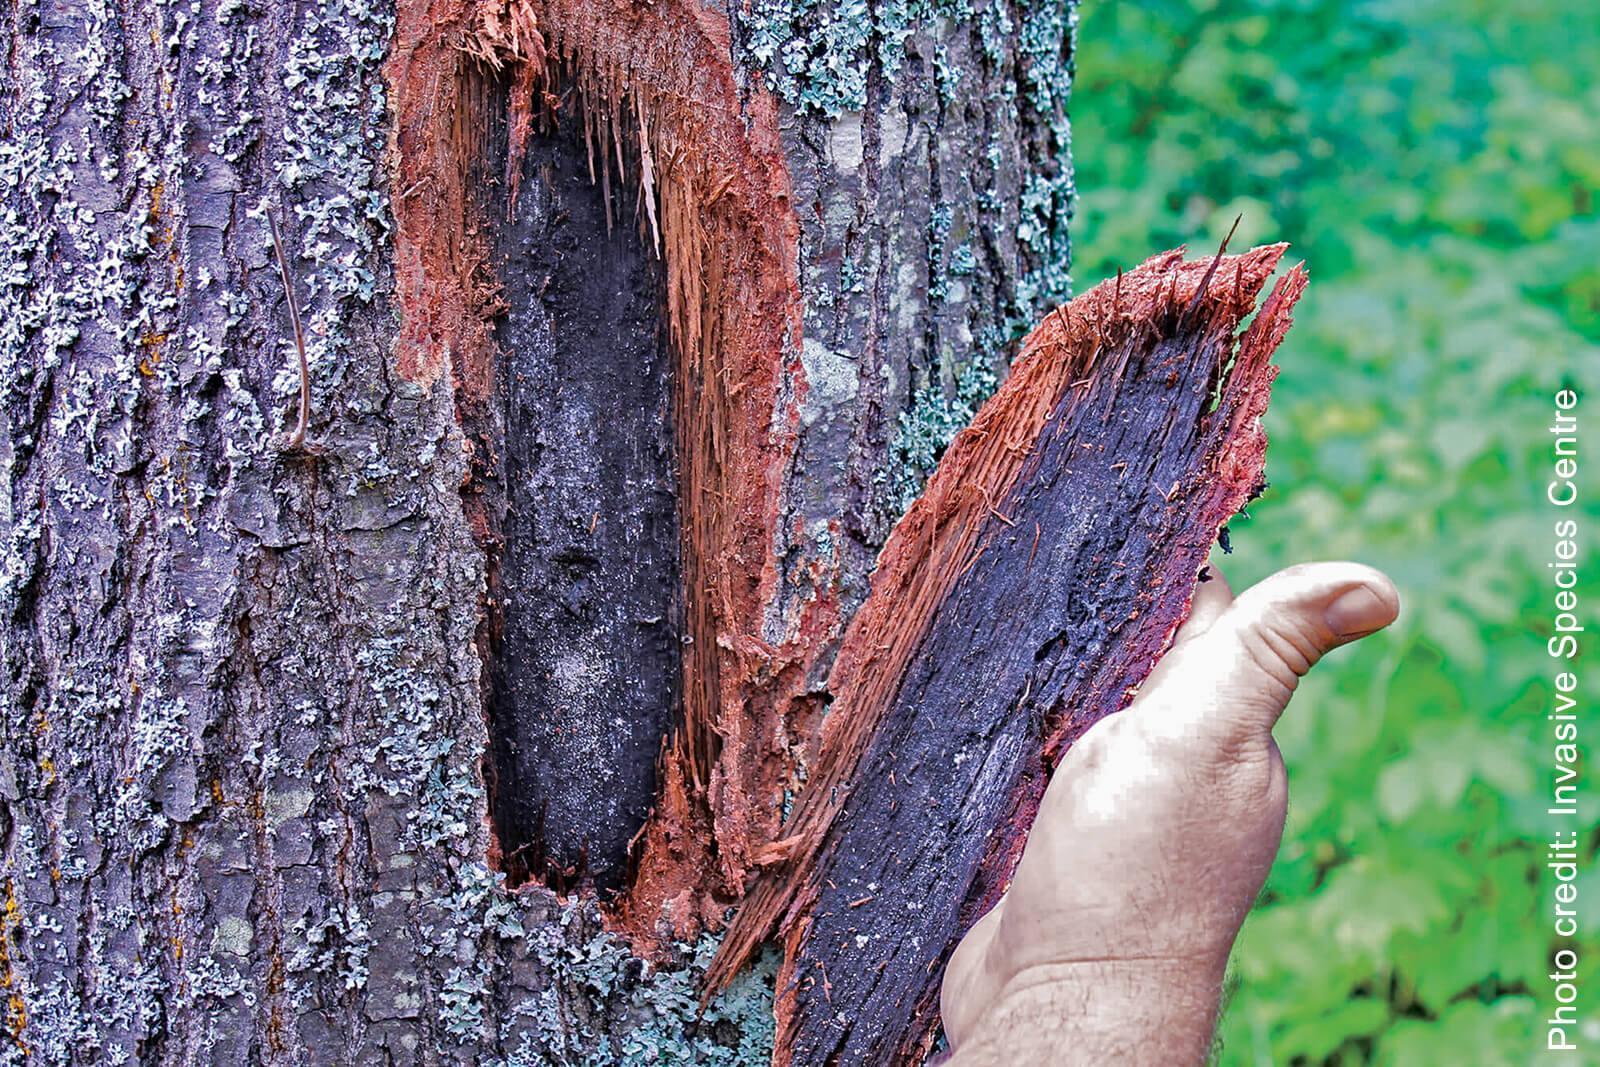 First Canadian detection of oak wilt found in Niagara